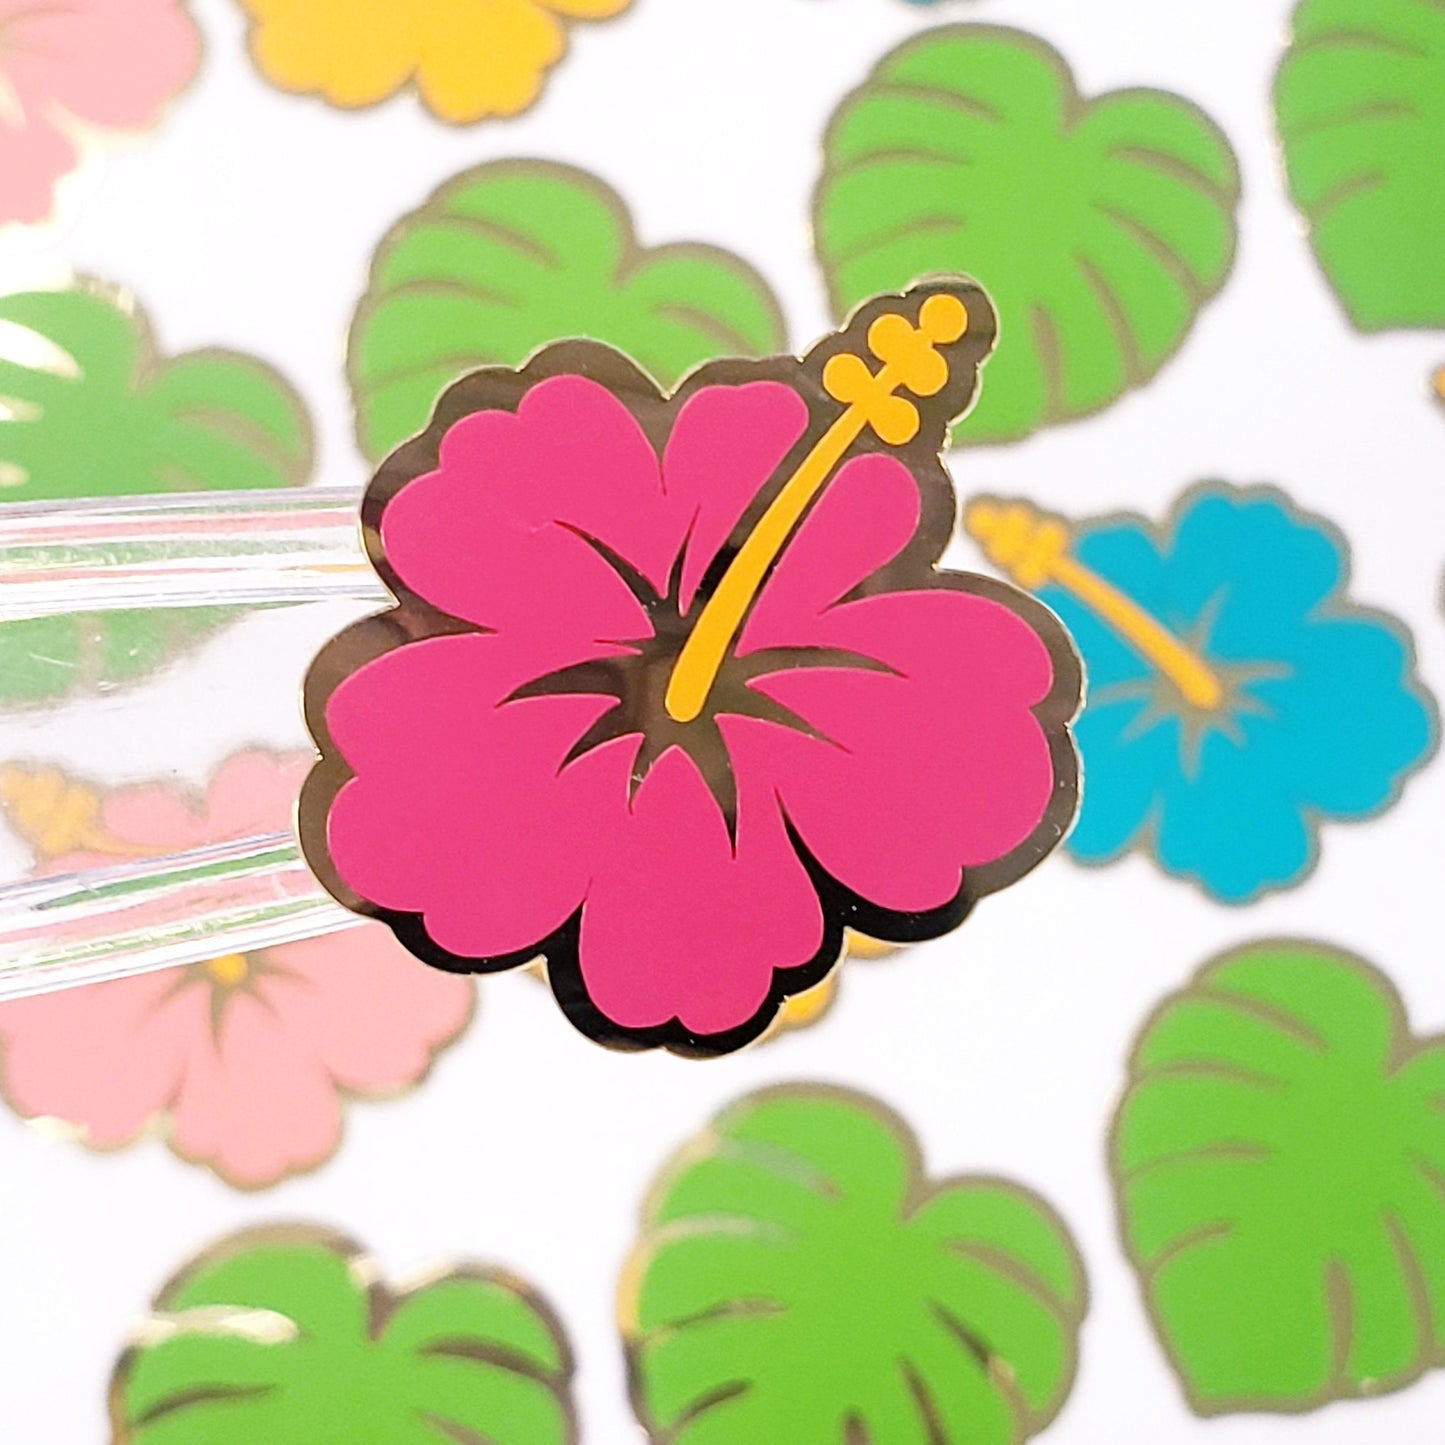 Tropical Flower Stickers, set of 20 hibiscus blooms and 15 monstera leaf stickers for journals, stationery and envelopes, bright colors.